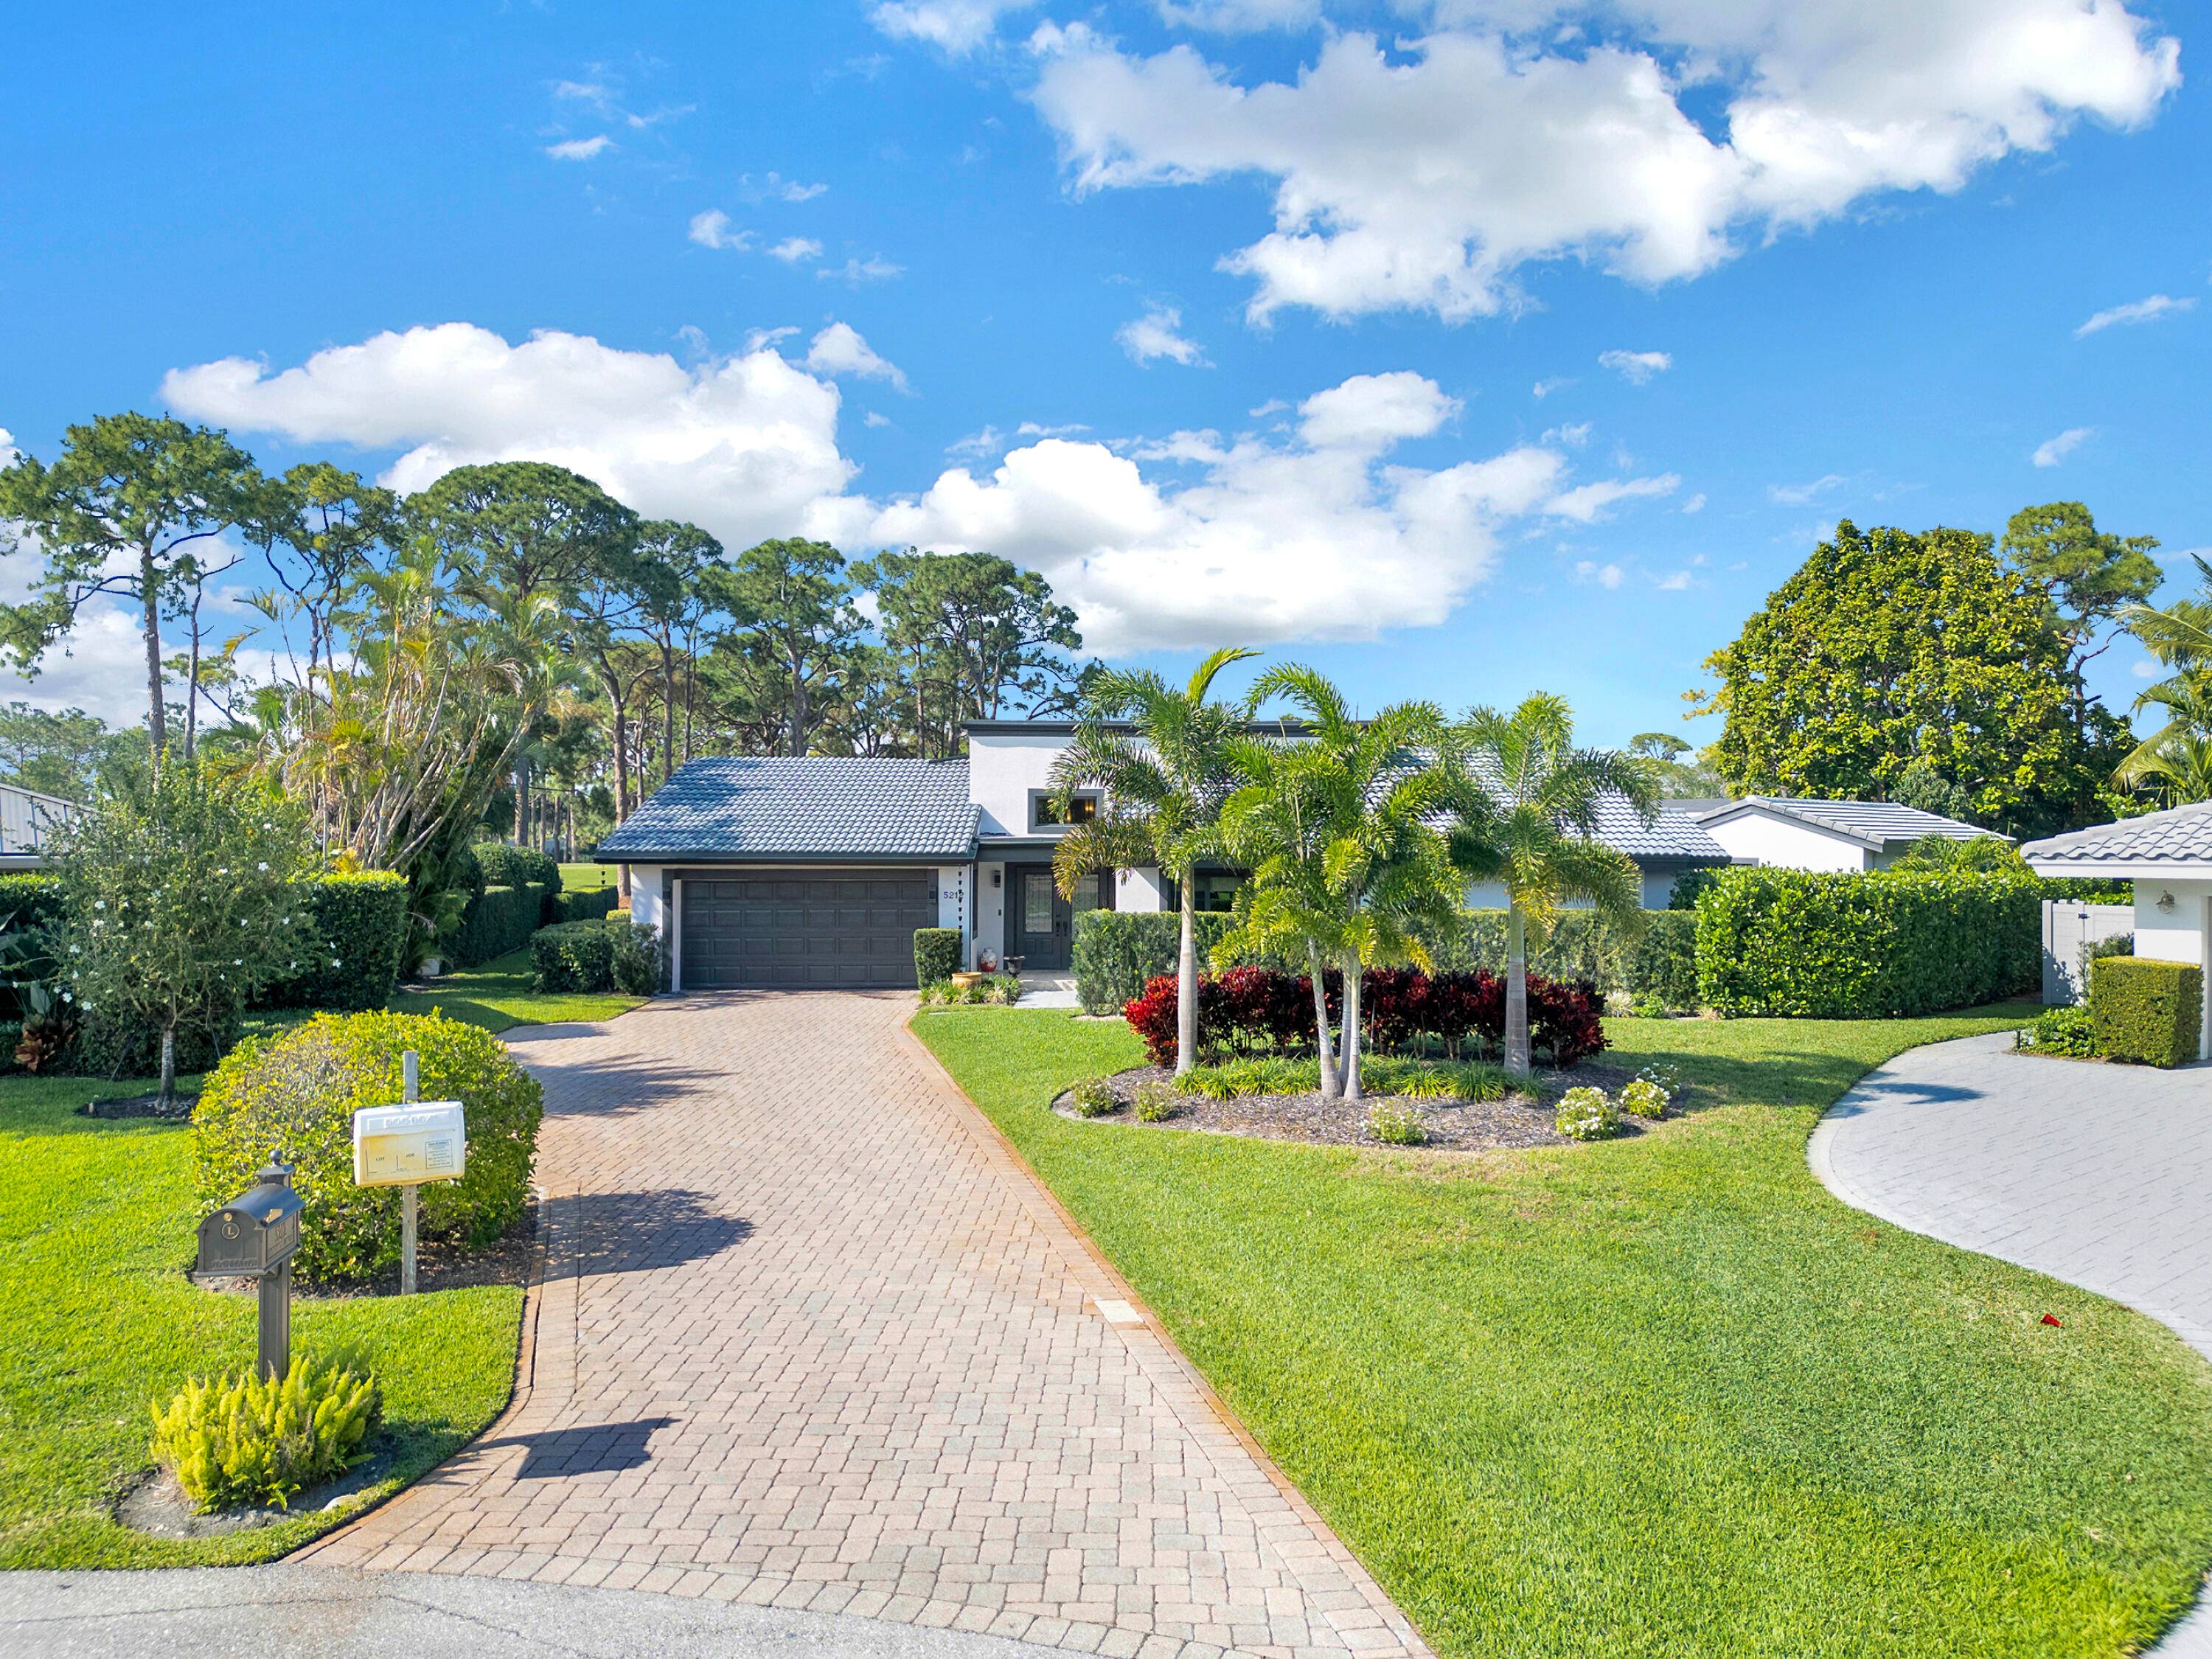 Nestled within the prestigious gated Seagate golf club community, this luxurious home captivates with its stunning design and unrivaled location along the 14th hole.